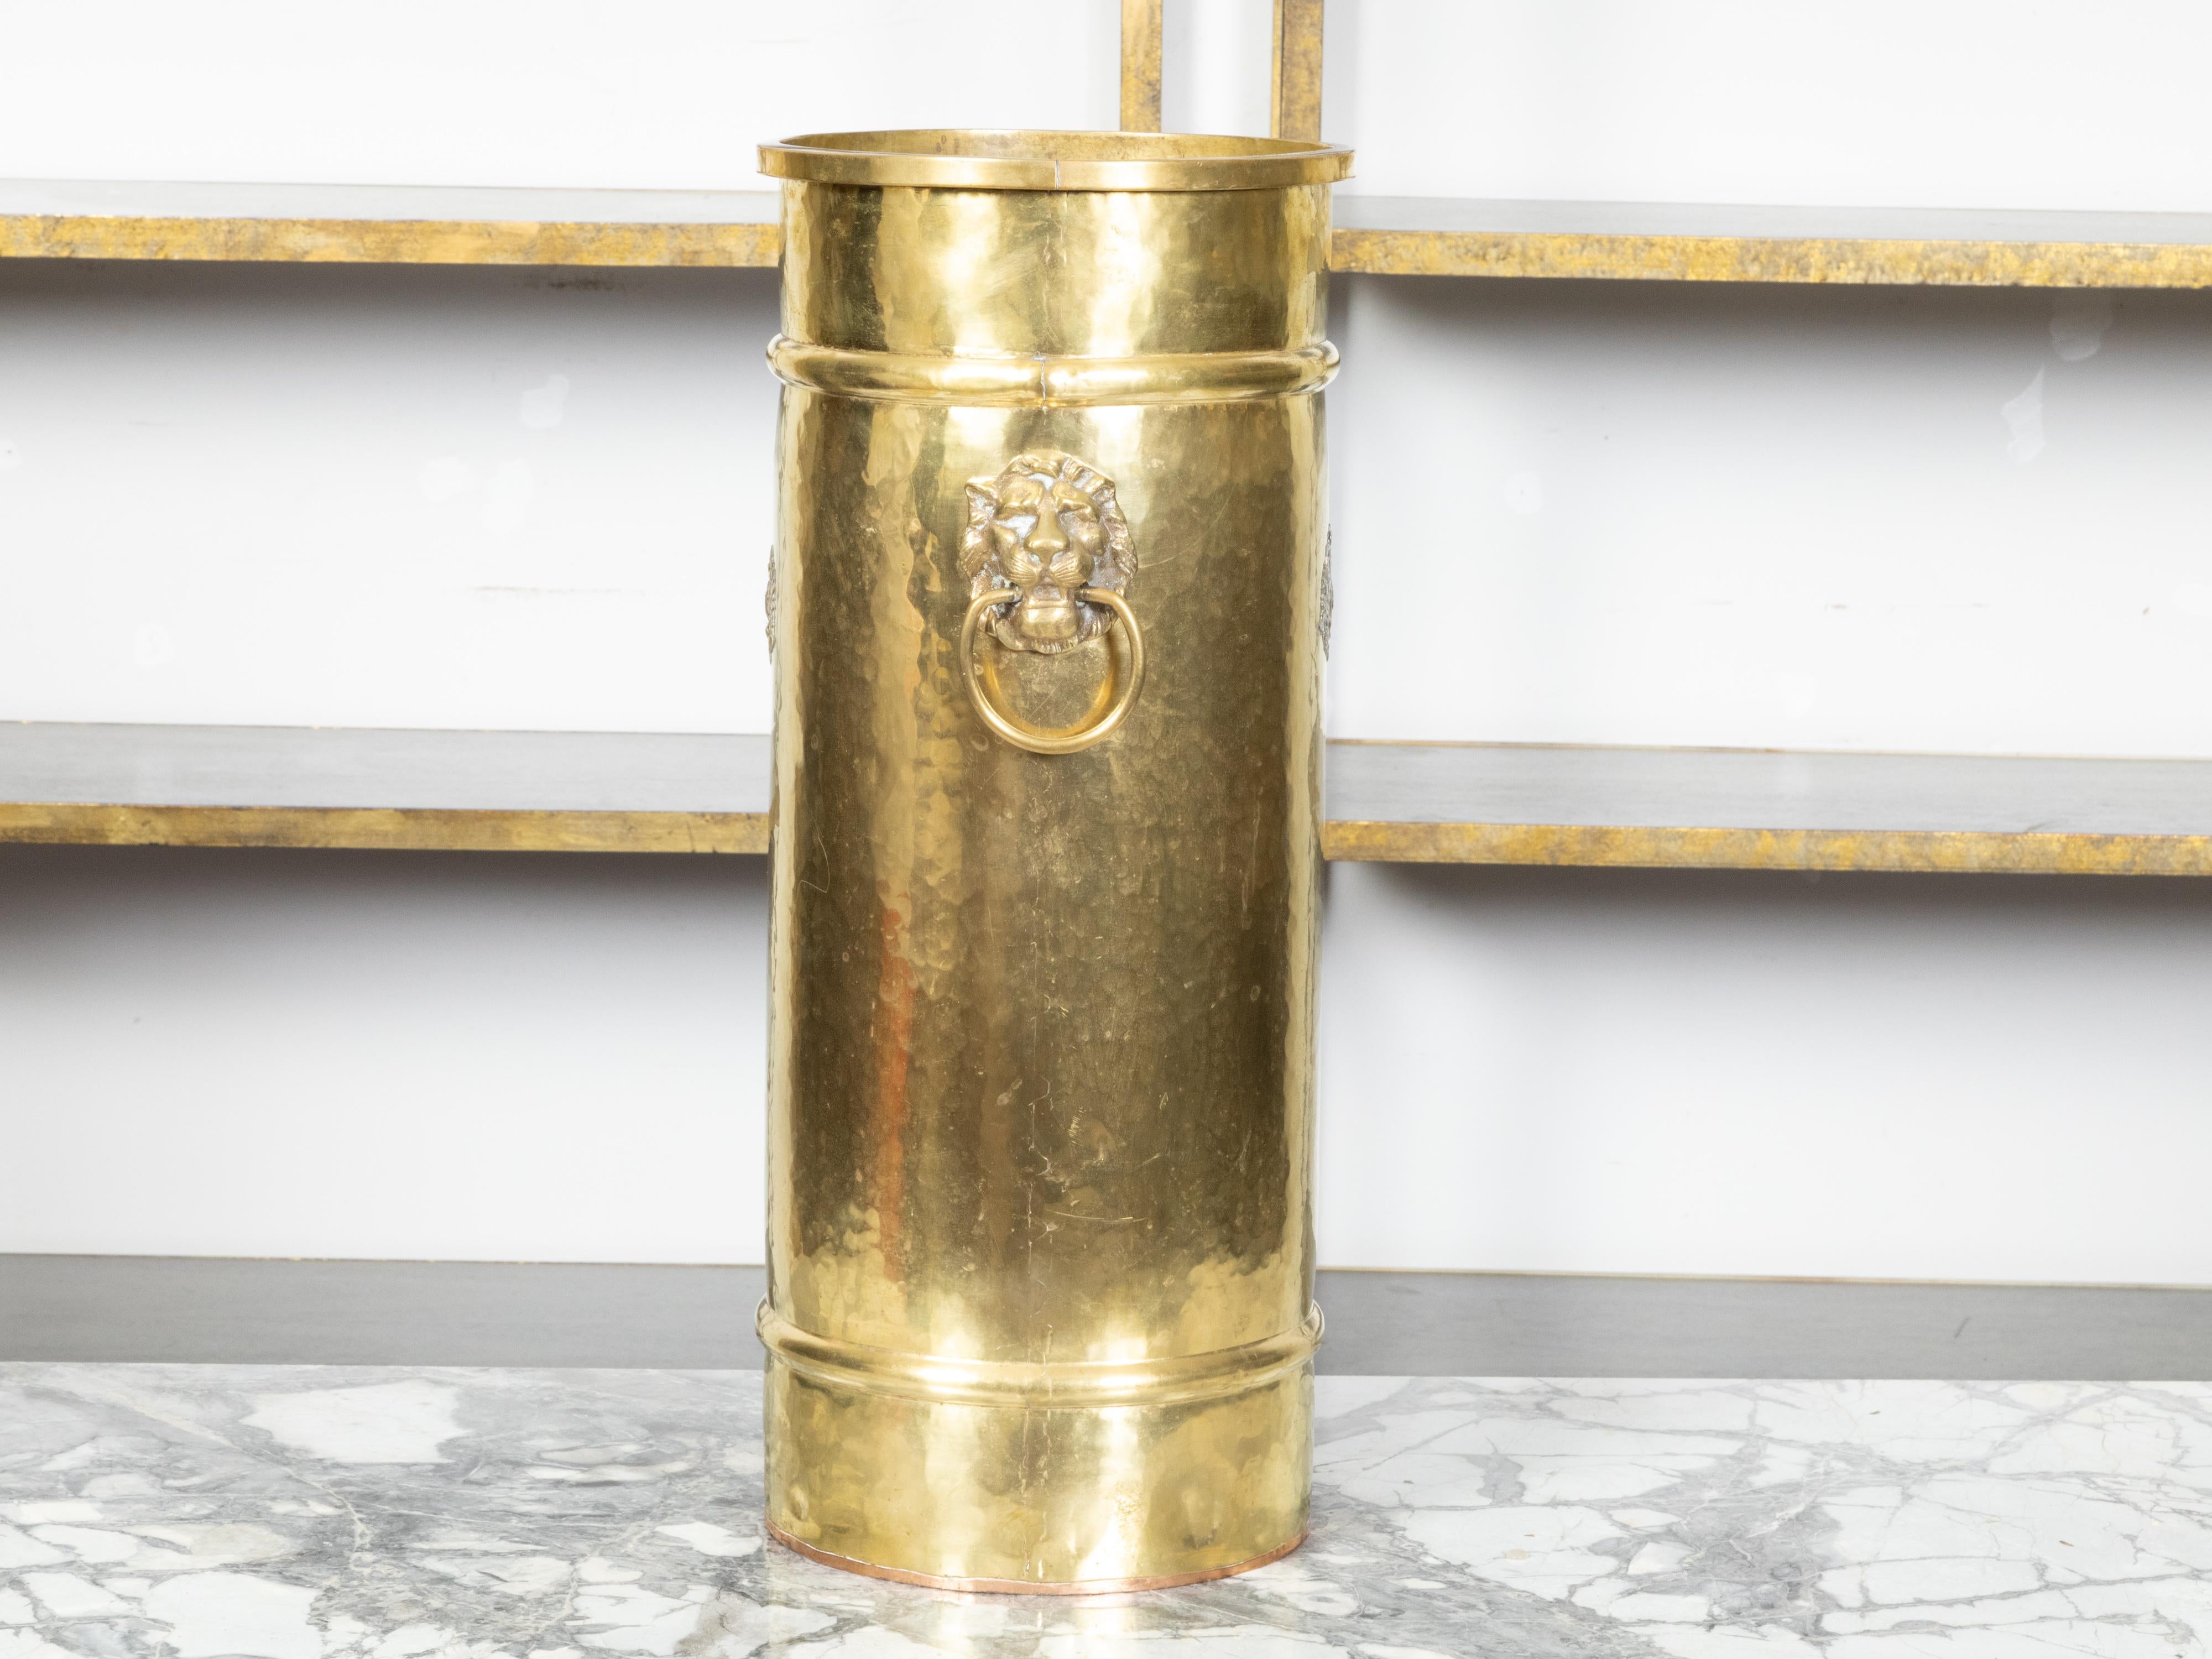 20th Century English 1920s Brass Umbrella Stand with Double-Headed Eagle Heraldic Motif